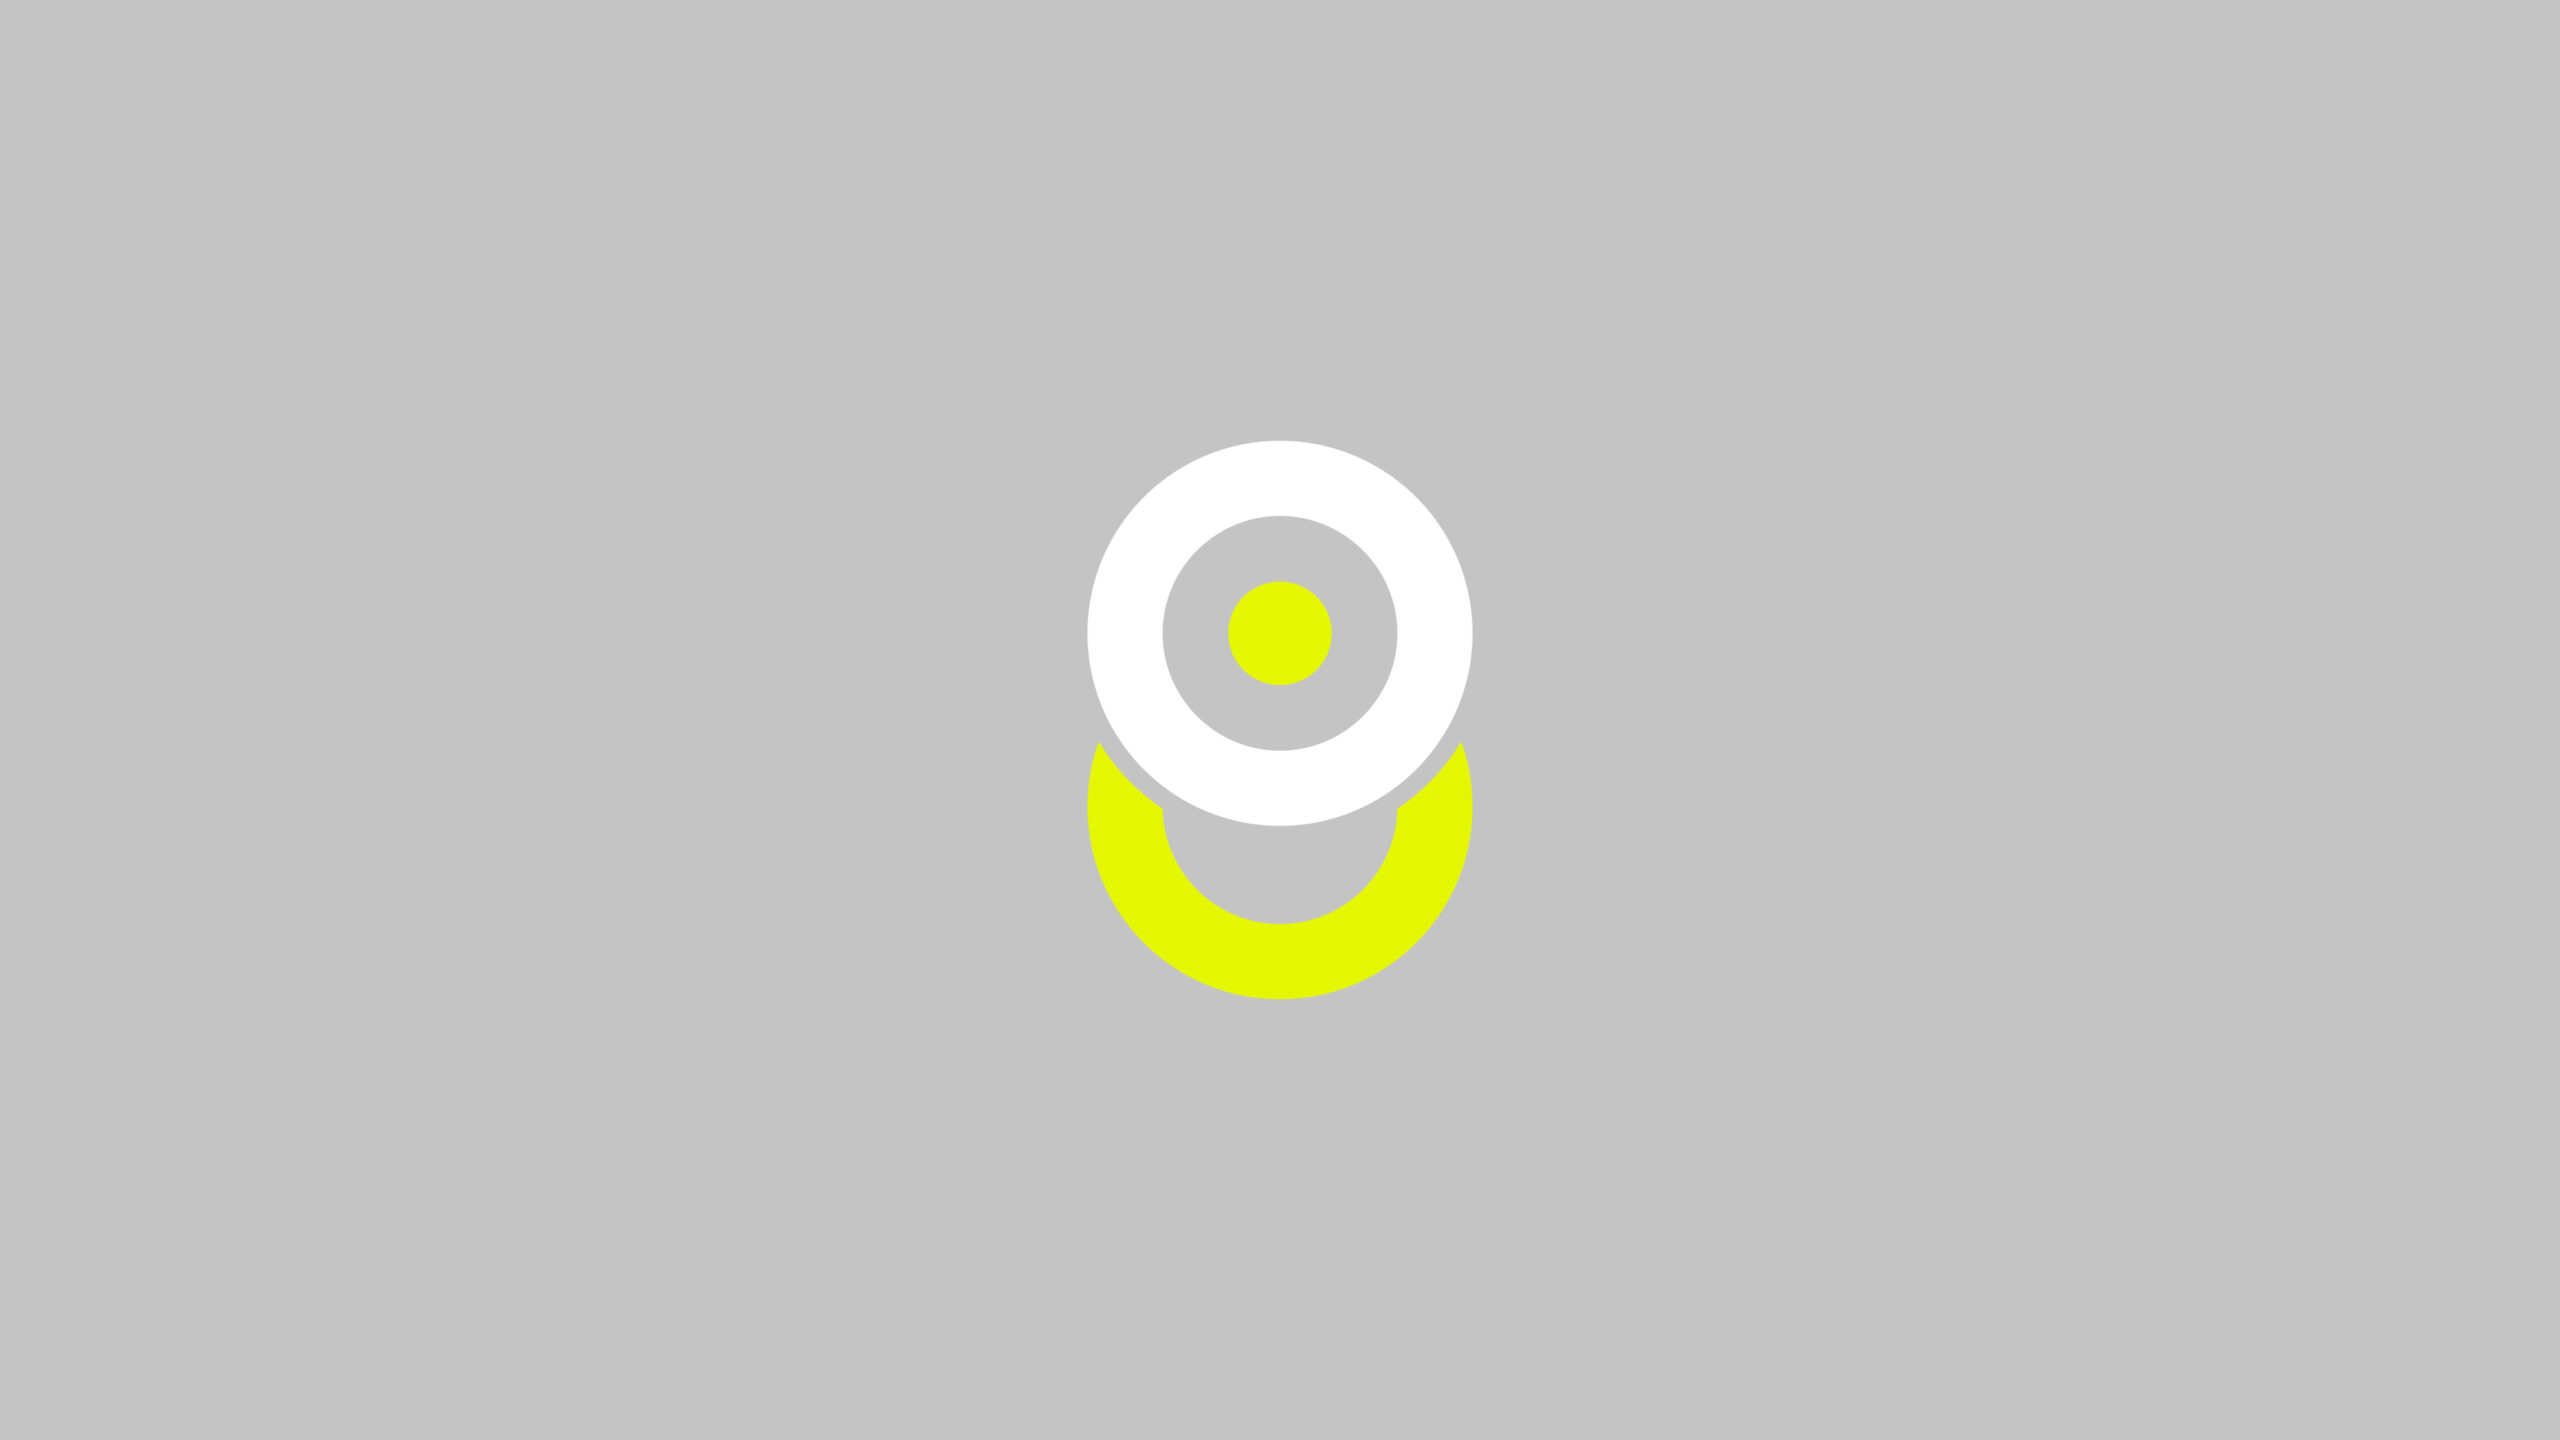 Capps brand white and yellow icon over a light grey background.